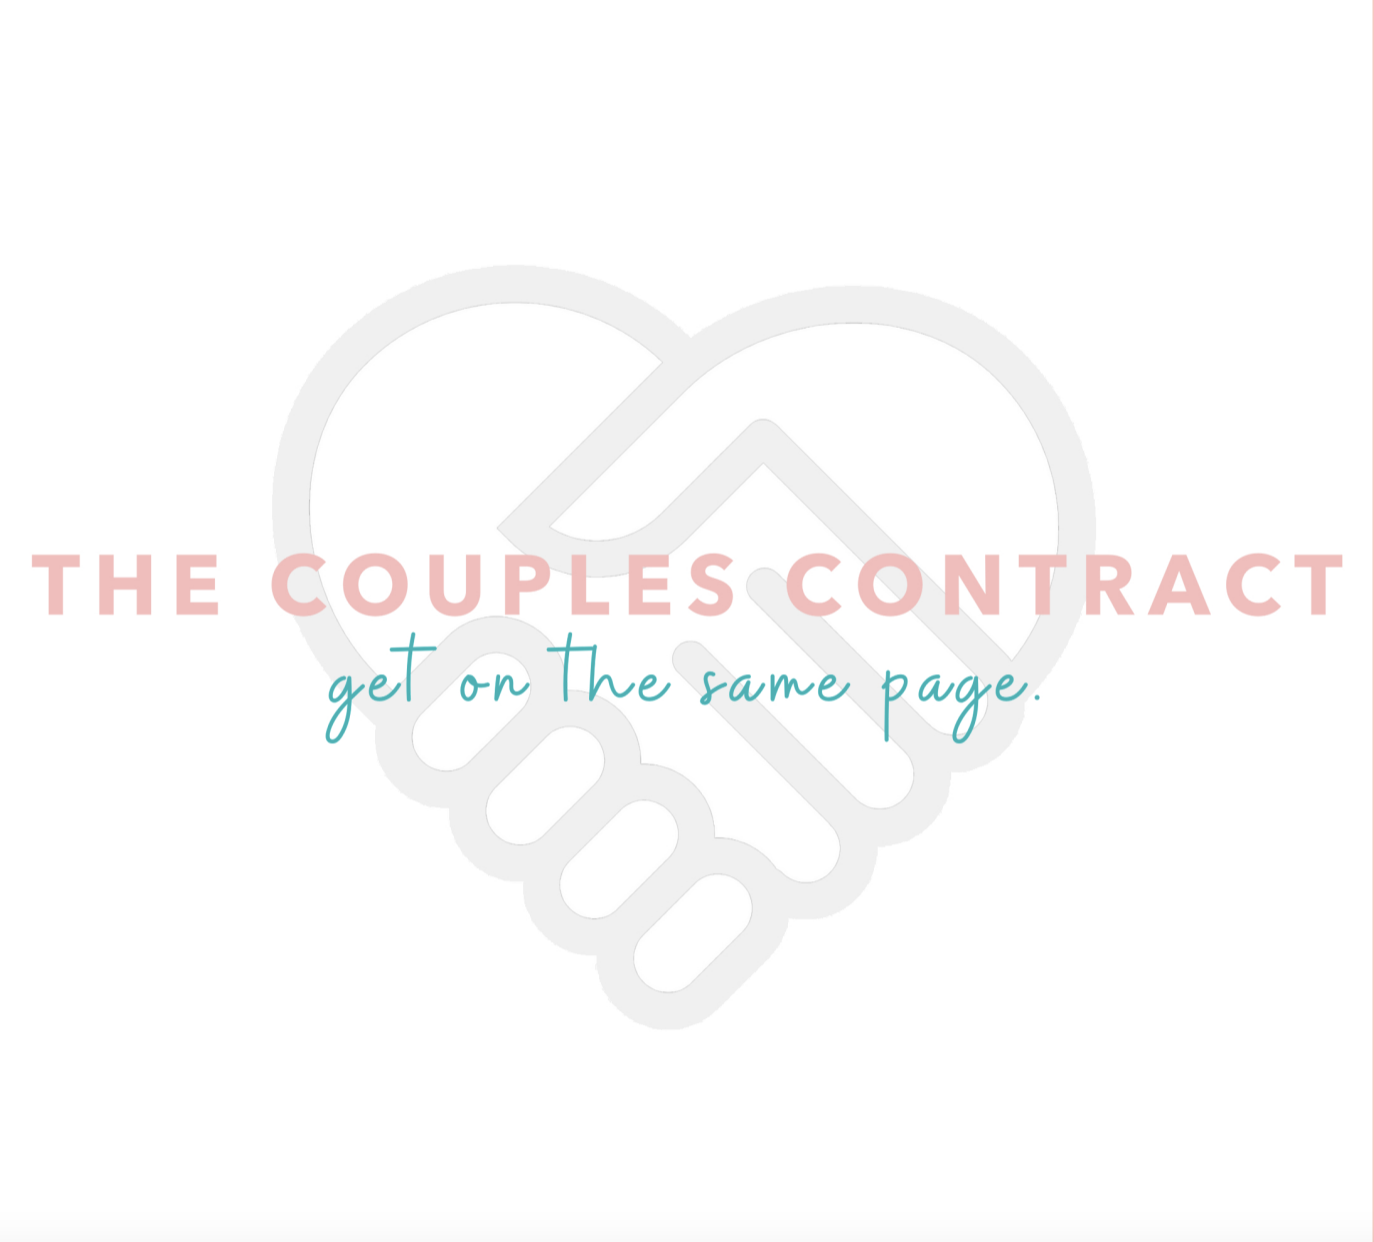 The Couples Company Launches Contract and Card Game for Couples To Define Their Relationship